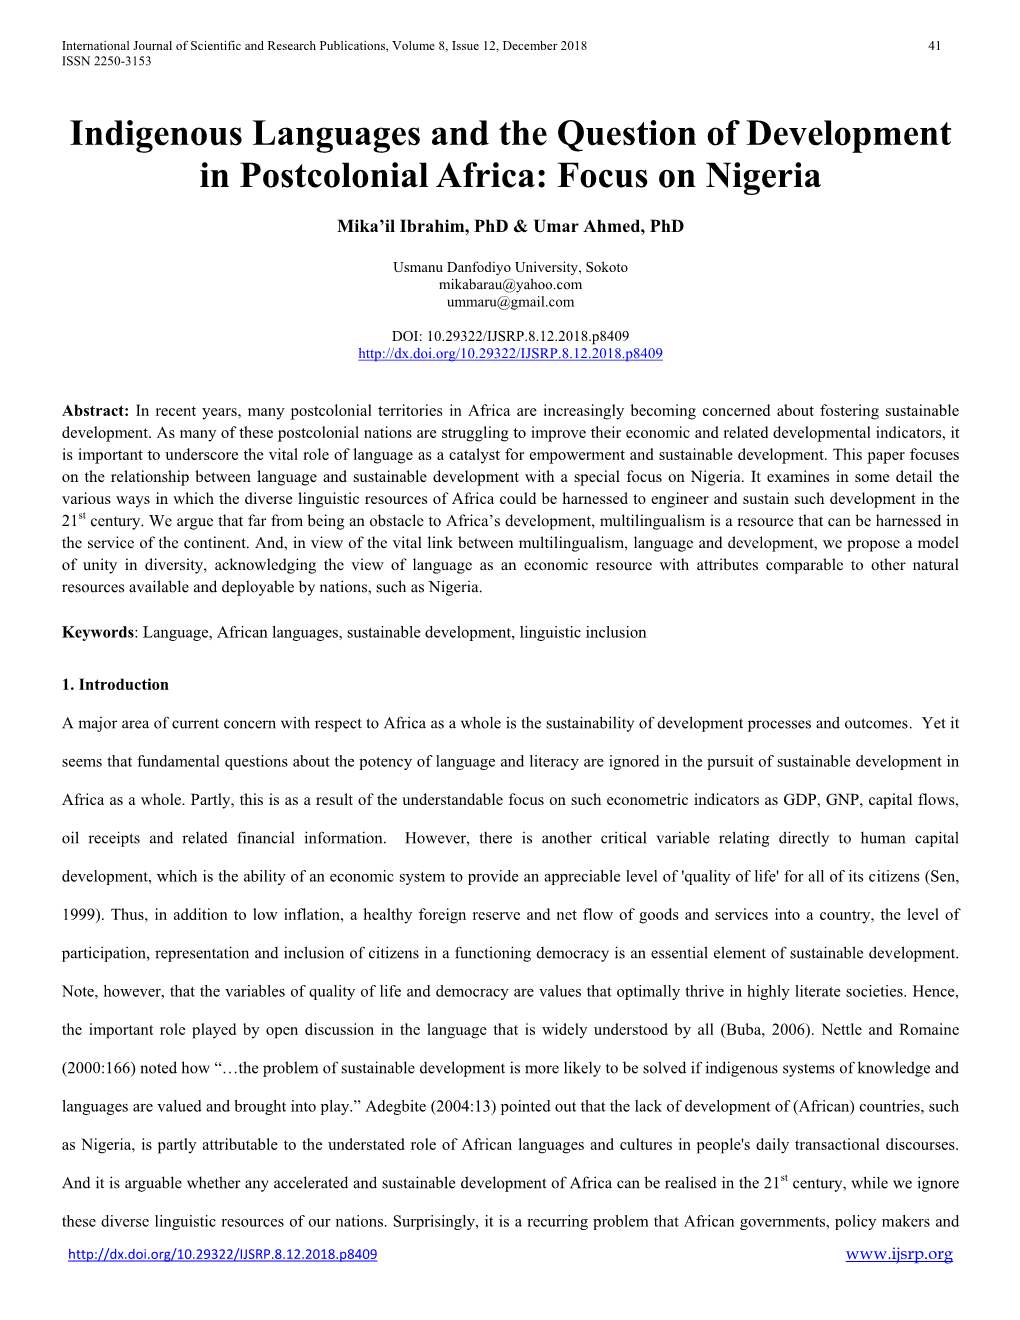 Indigenous Languages and the Question of Development in Postcolonial Africa: Focus on Nigeria